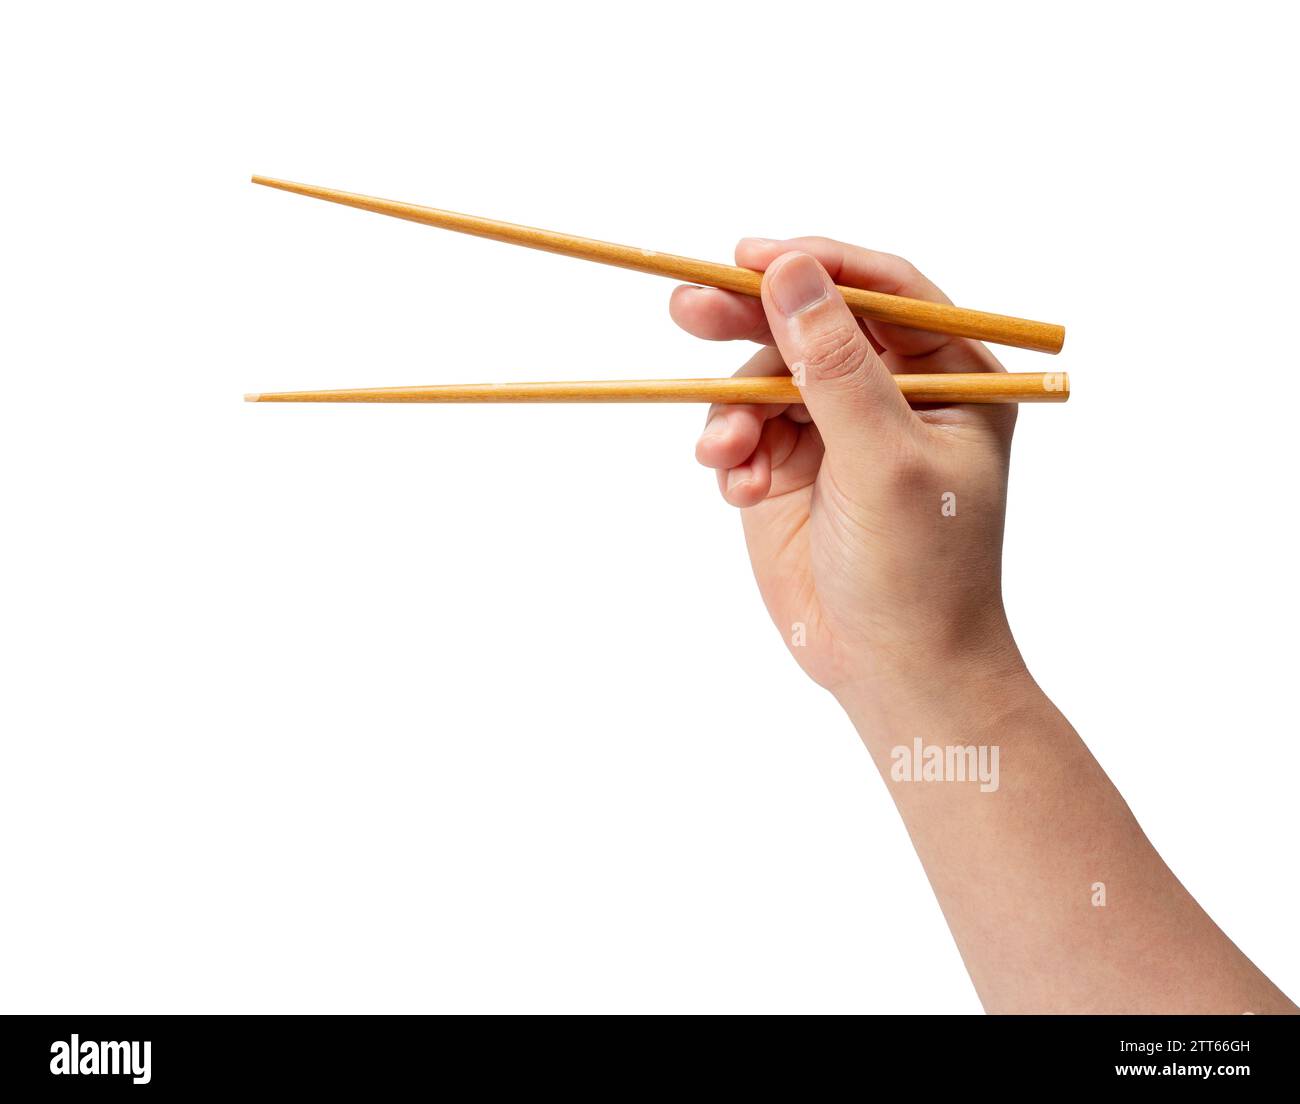 Wooden chopsticks in hand isolated on white background. Stock Photo